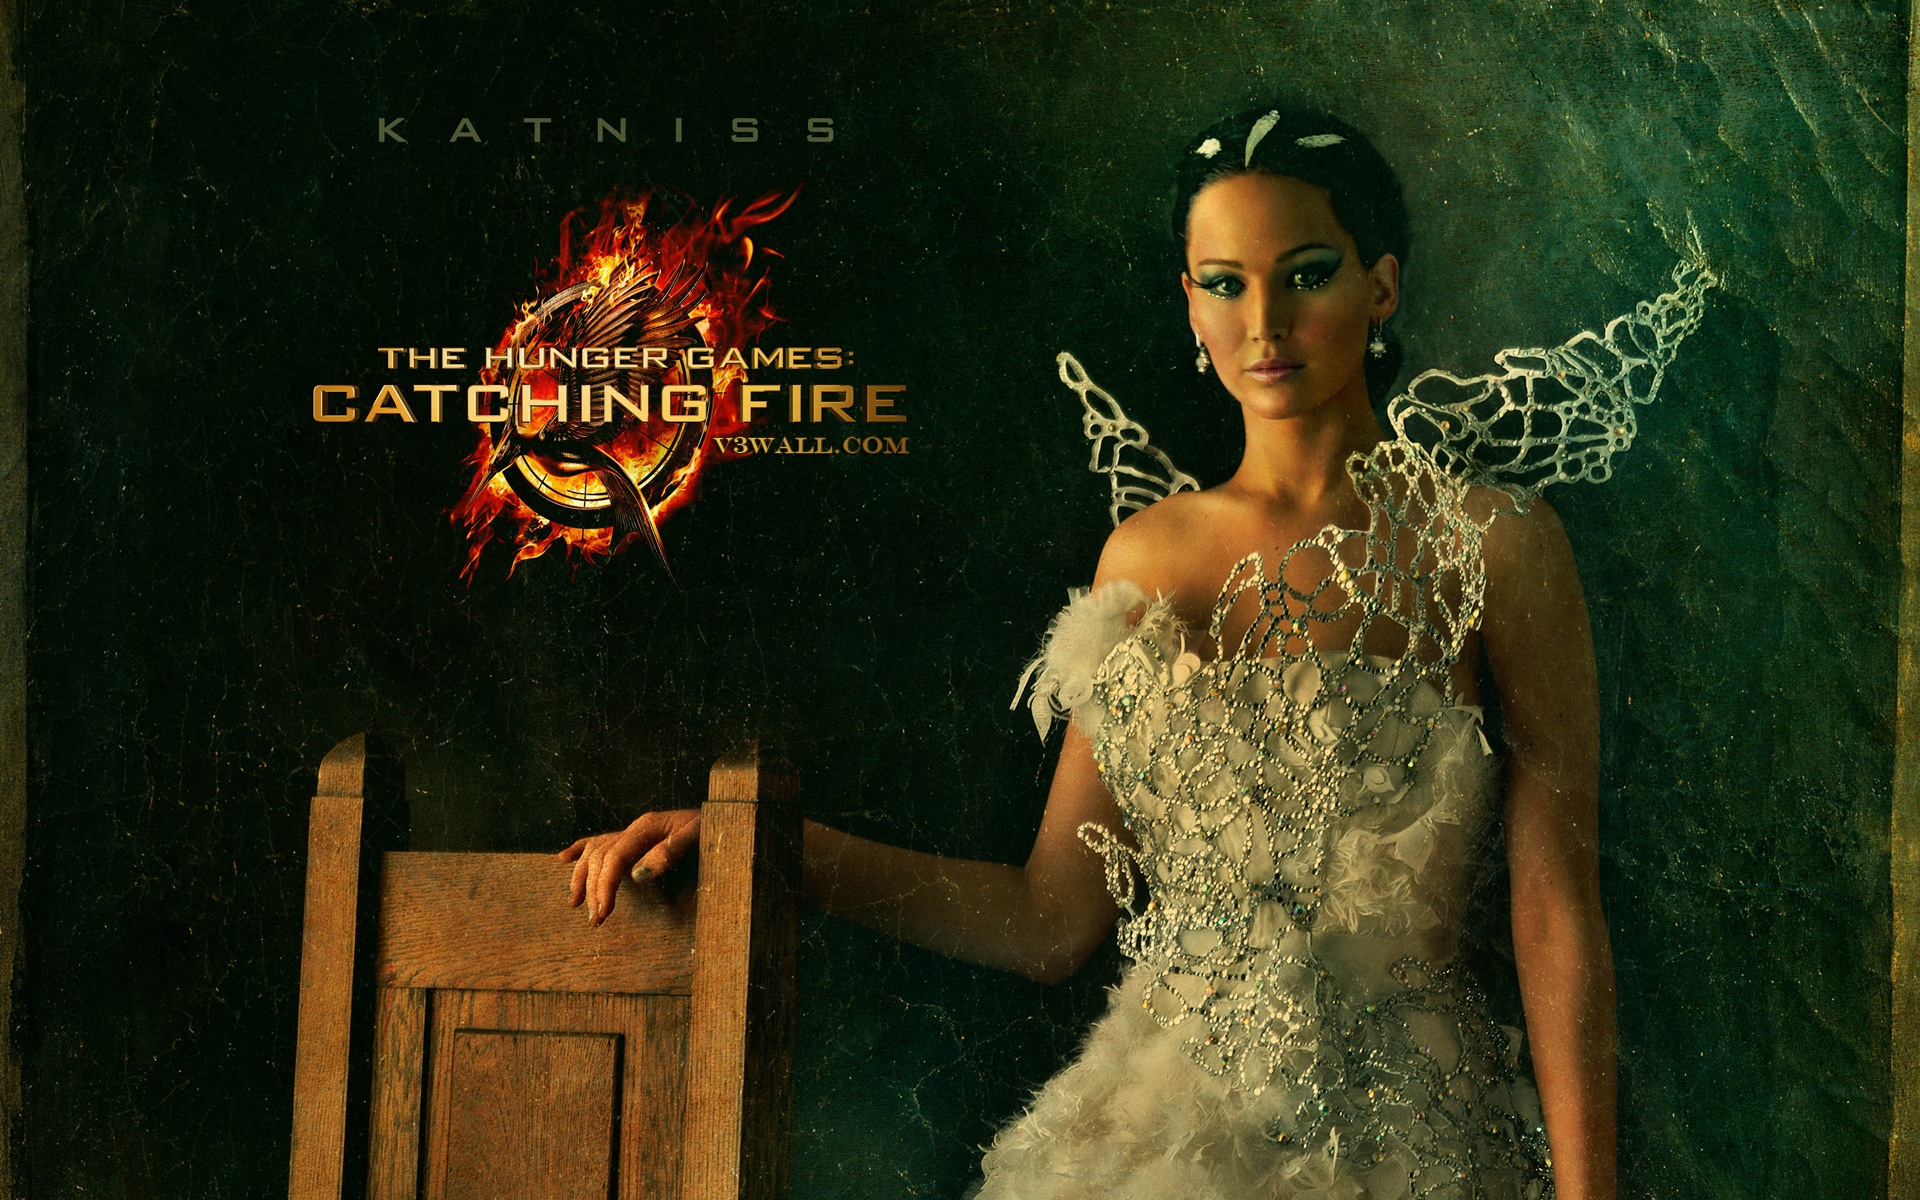 The Hunger Games: Catching Fire HD tapety #13 - 1920x1200